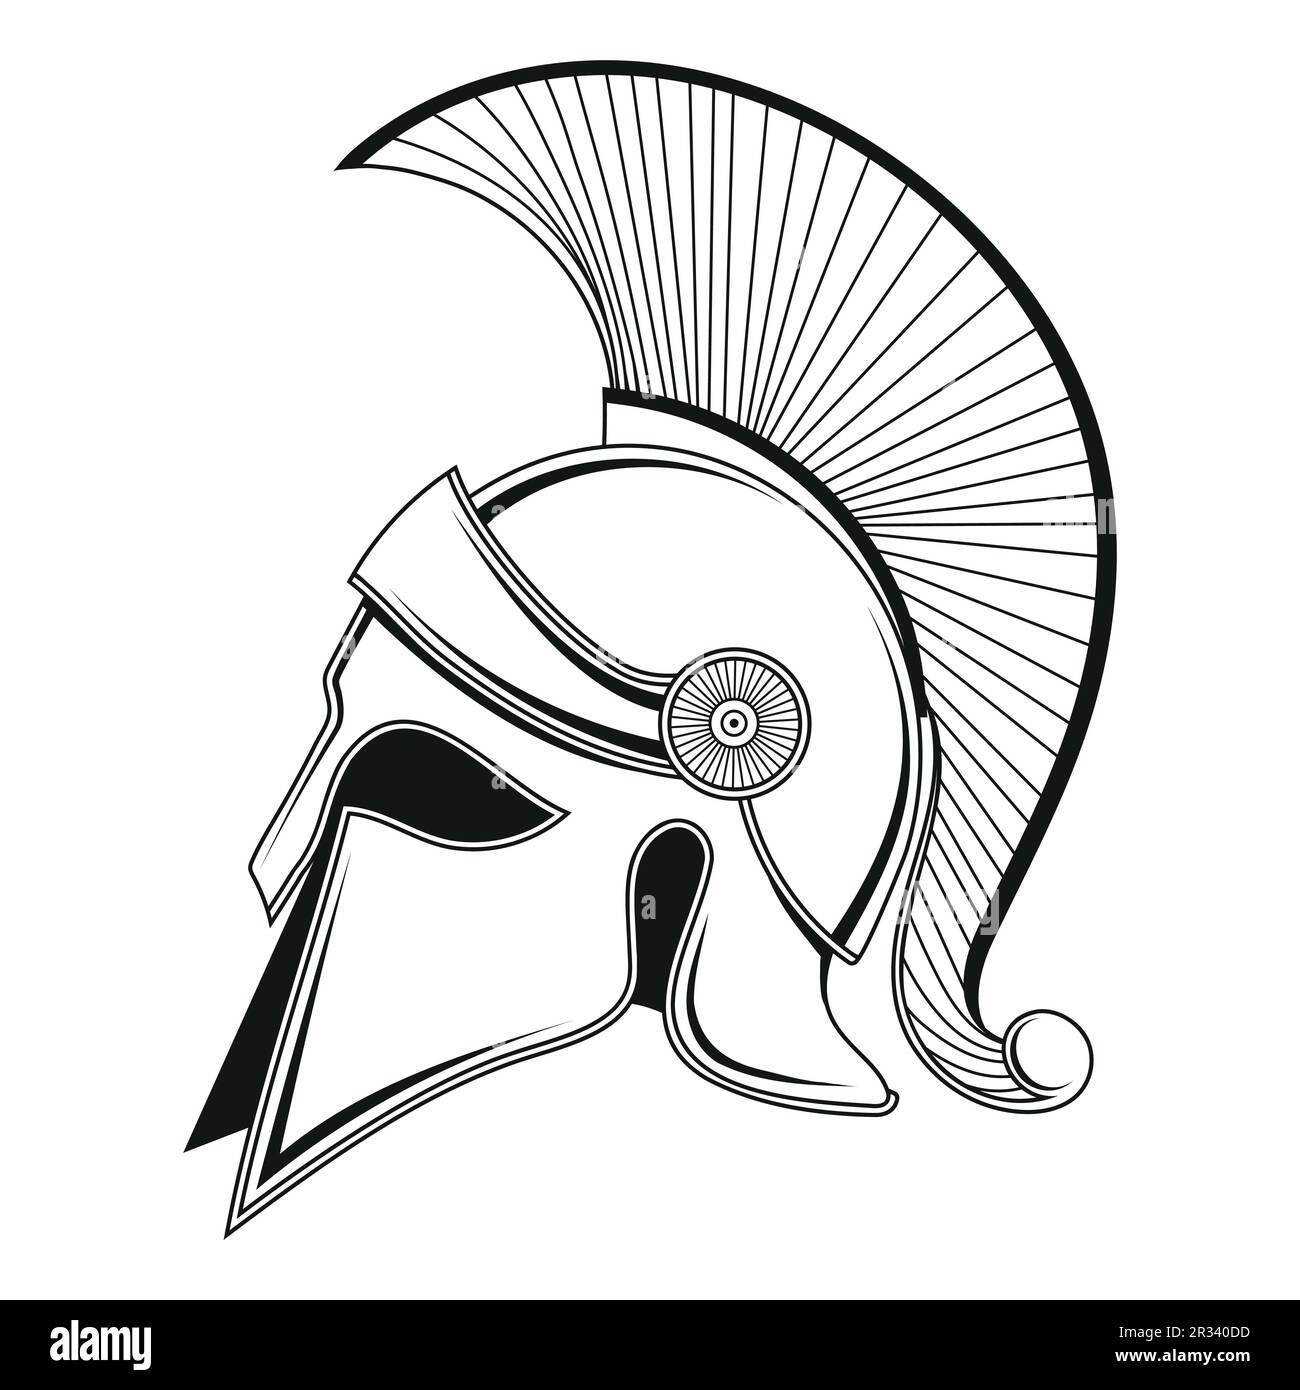 How to Draw a Spartan Warrior Real Easy - Step by Step - YouTube